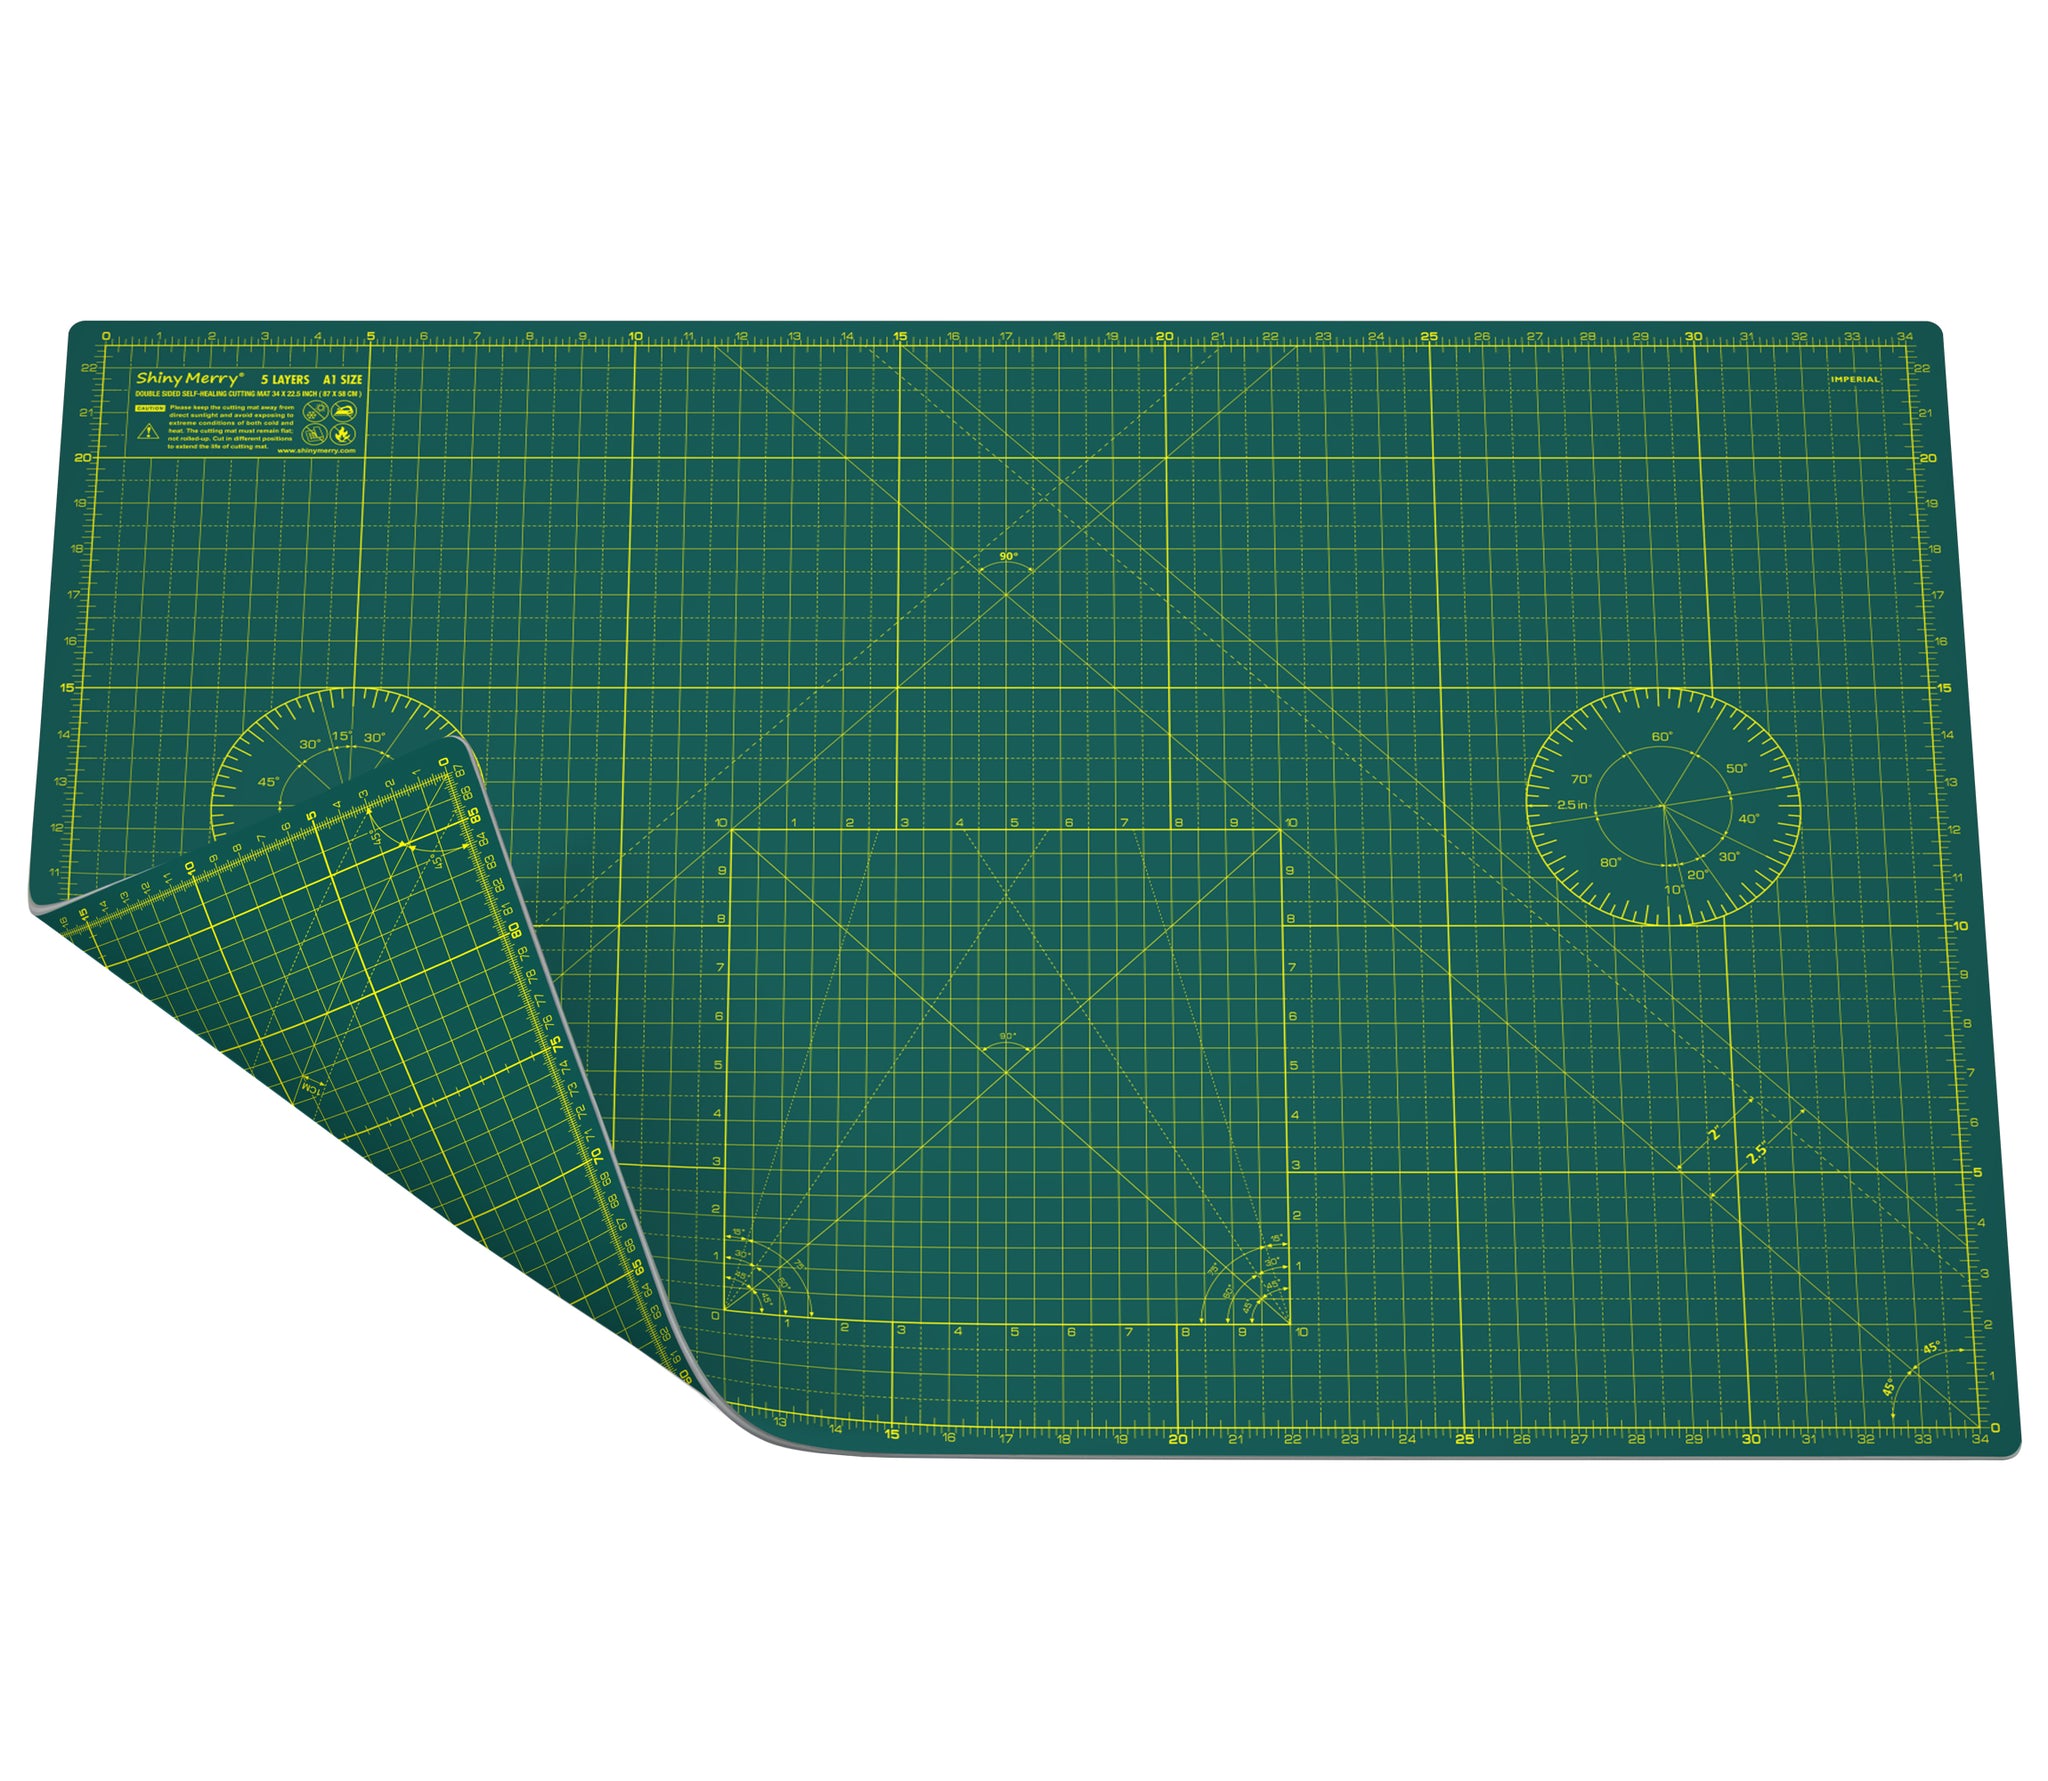 Free Sample High Quality 24*36 Inch Flexible PVC Self Healing Cutting Mat  a1 for Sewing Cutting